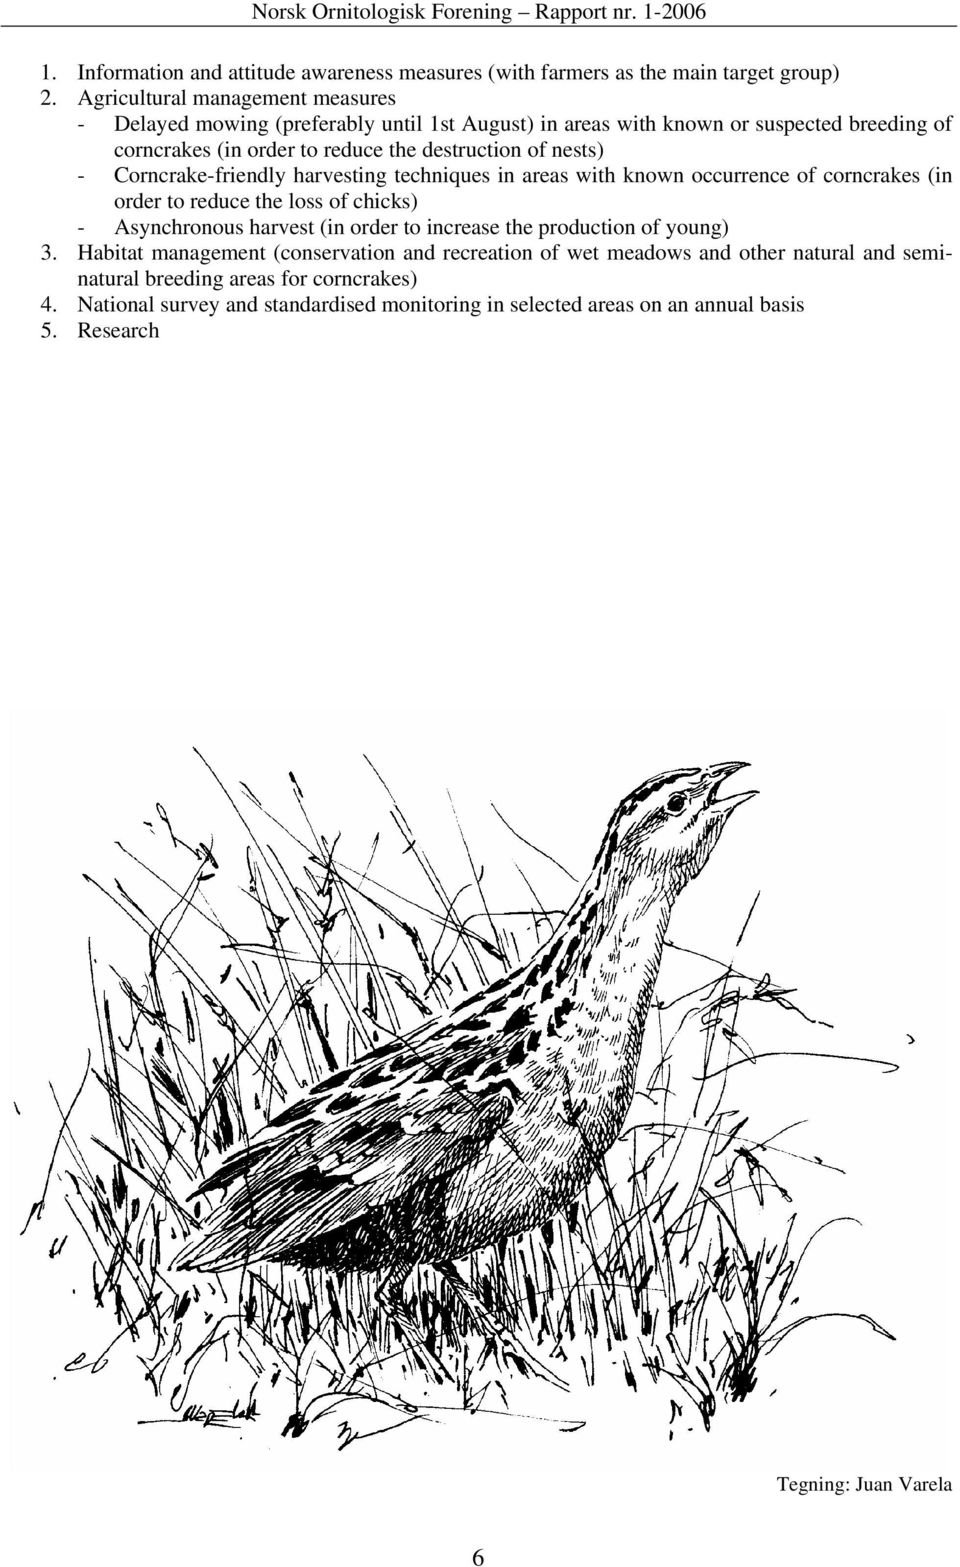 nests) - Corncrake-friendly harvesting techniques in areas with known occurrence of corncrakes (in order to reduce the loss of chicks) - Asynchronous harvest (in order to increase